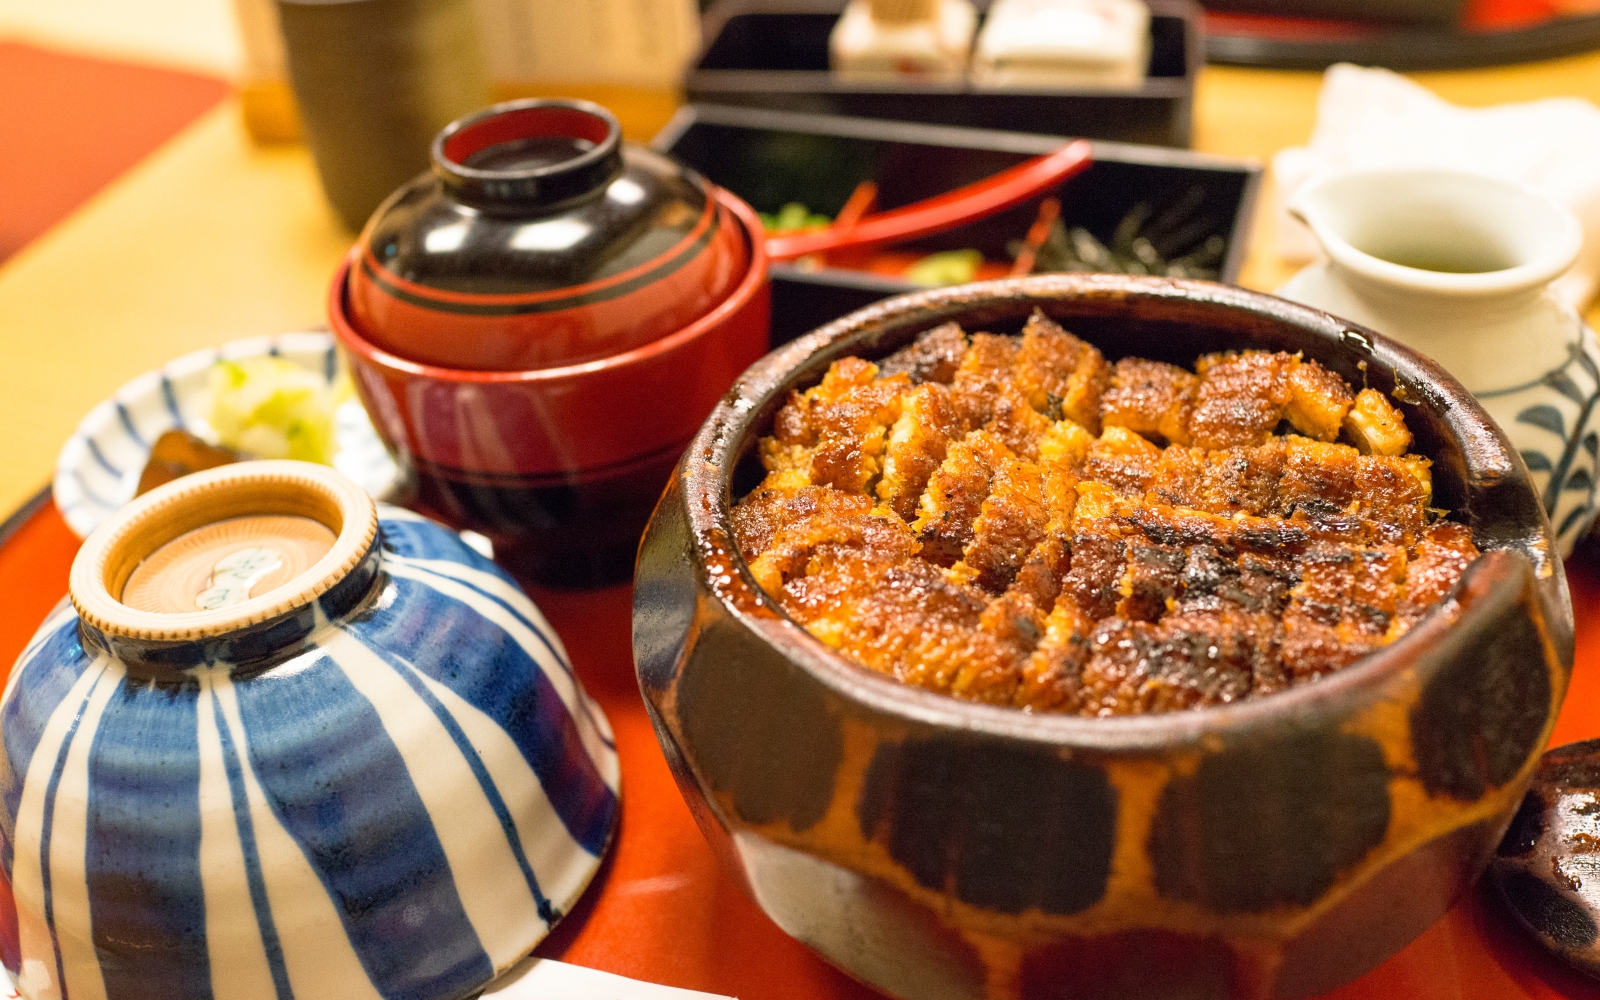 A bowl of Nagoya-style grilled eel with rice, known as hitsumabushi